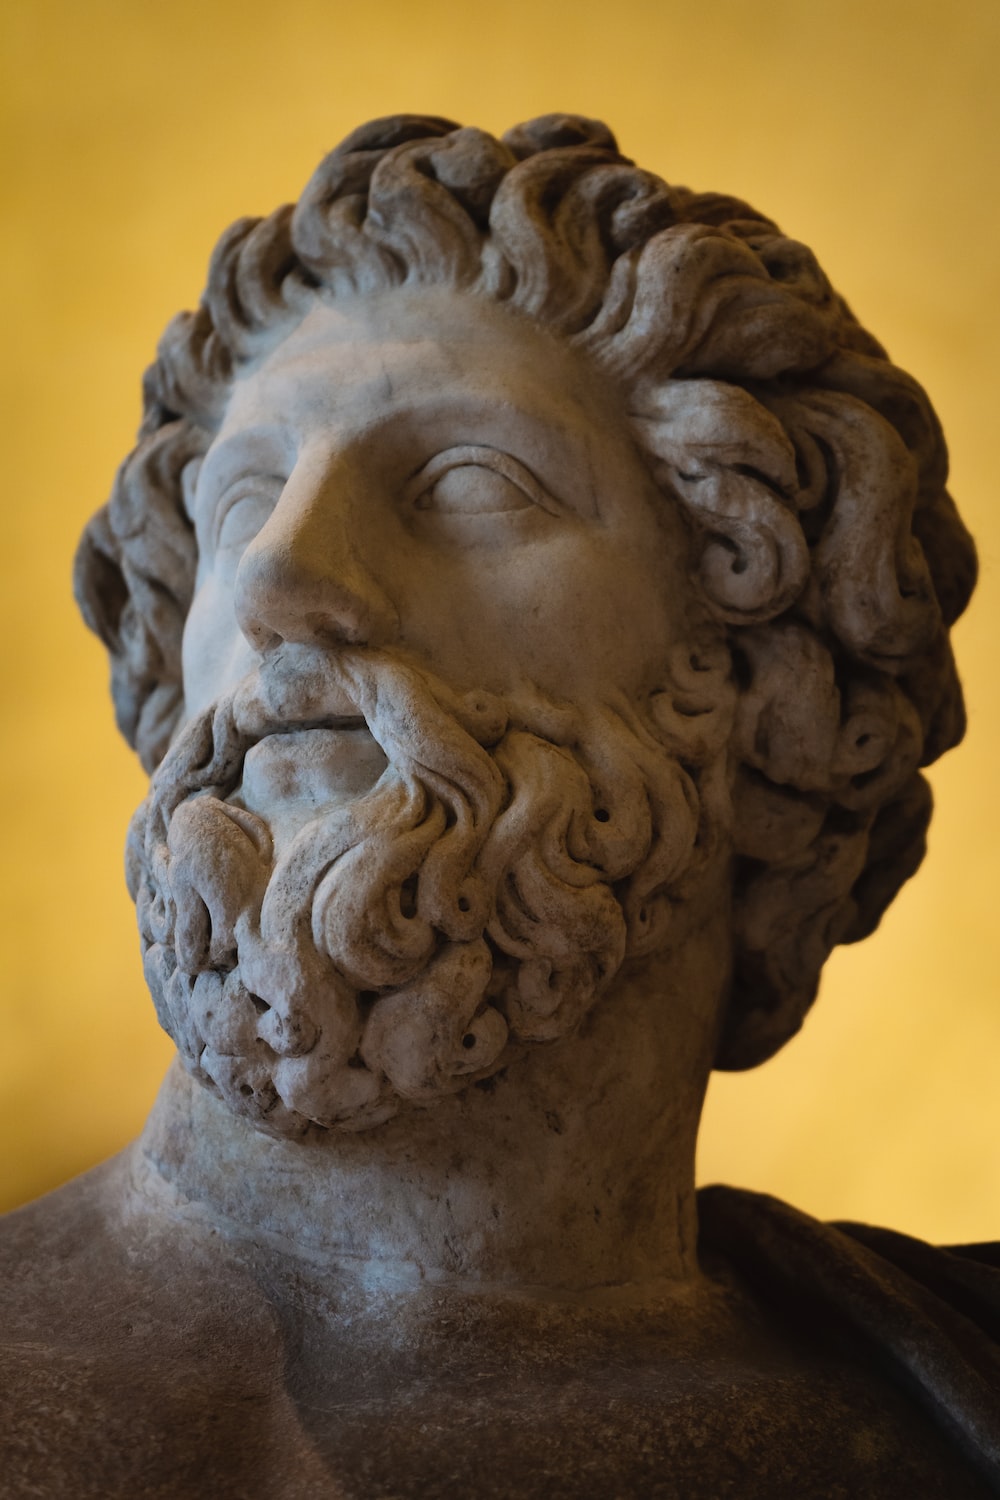 A sculpture of a man with a beard and curly hair. - Greek statue